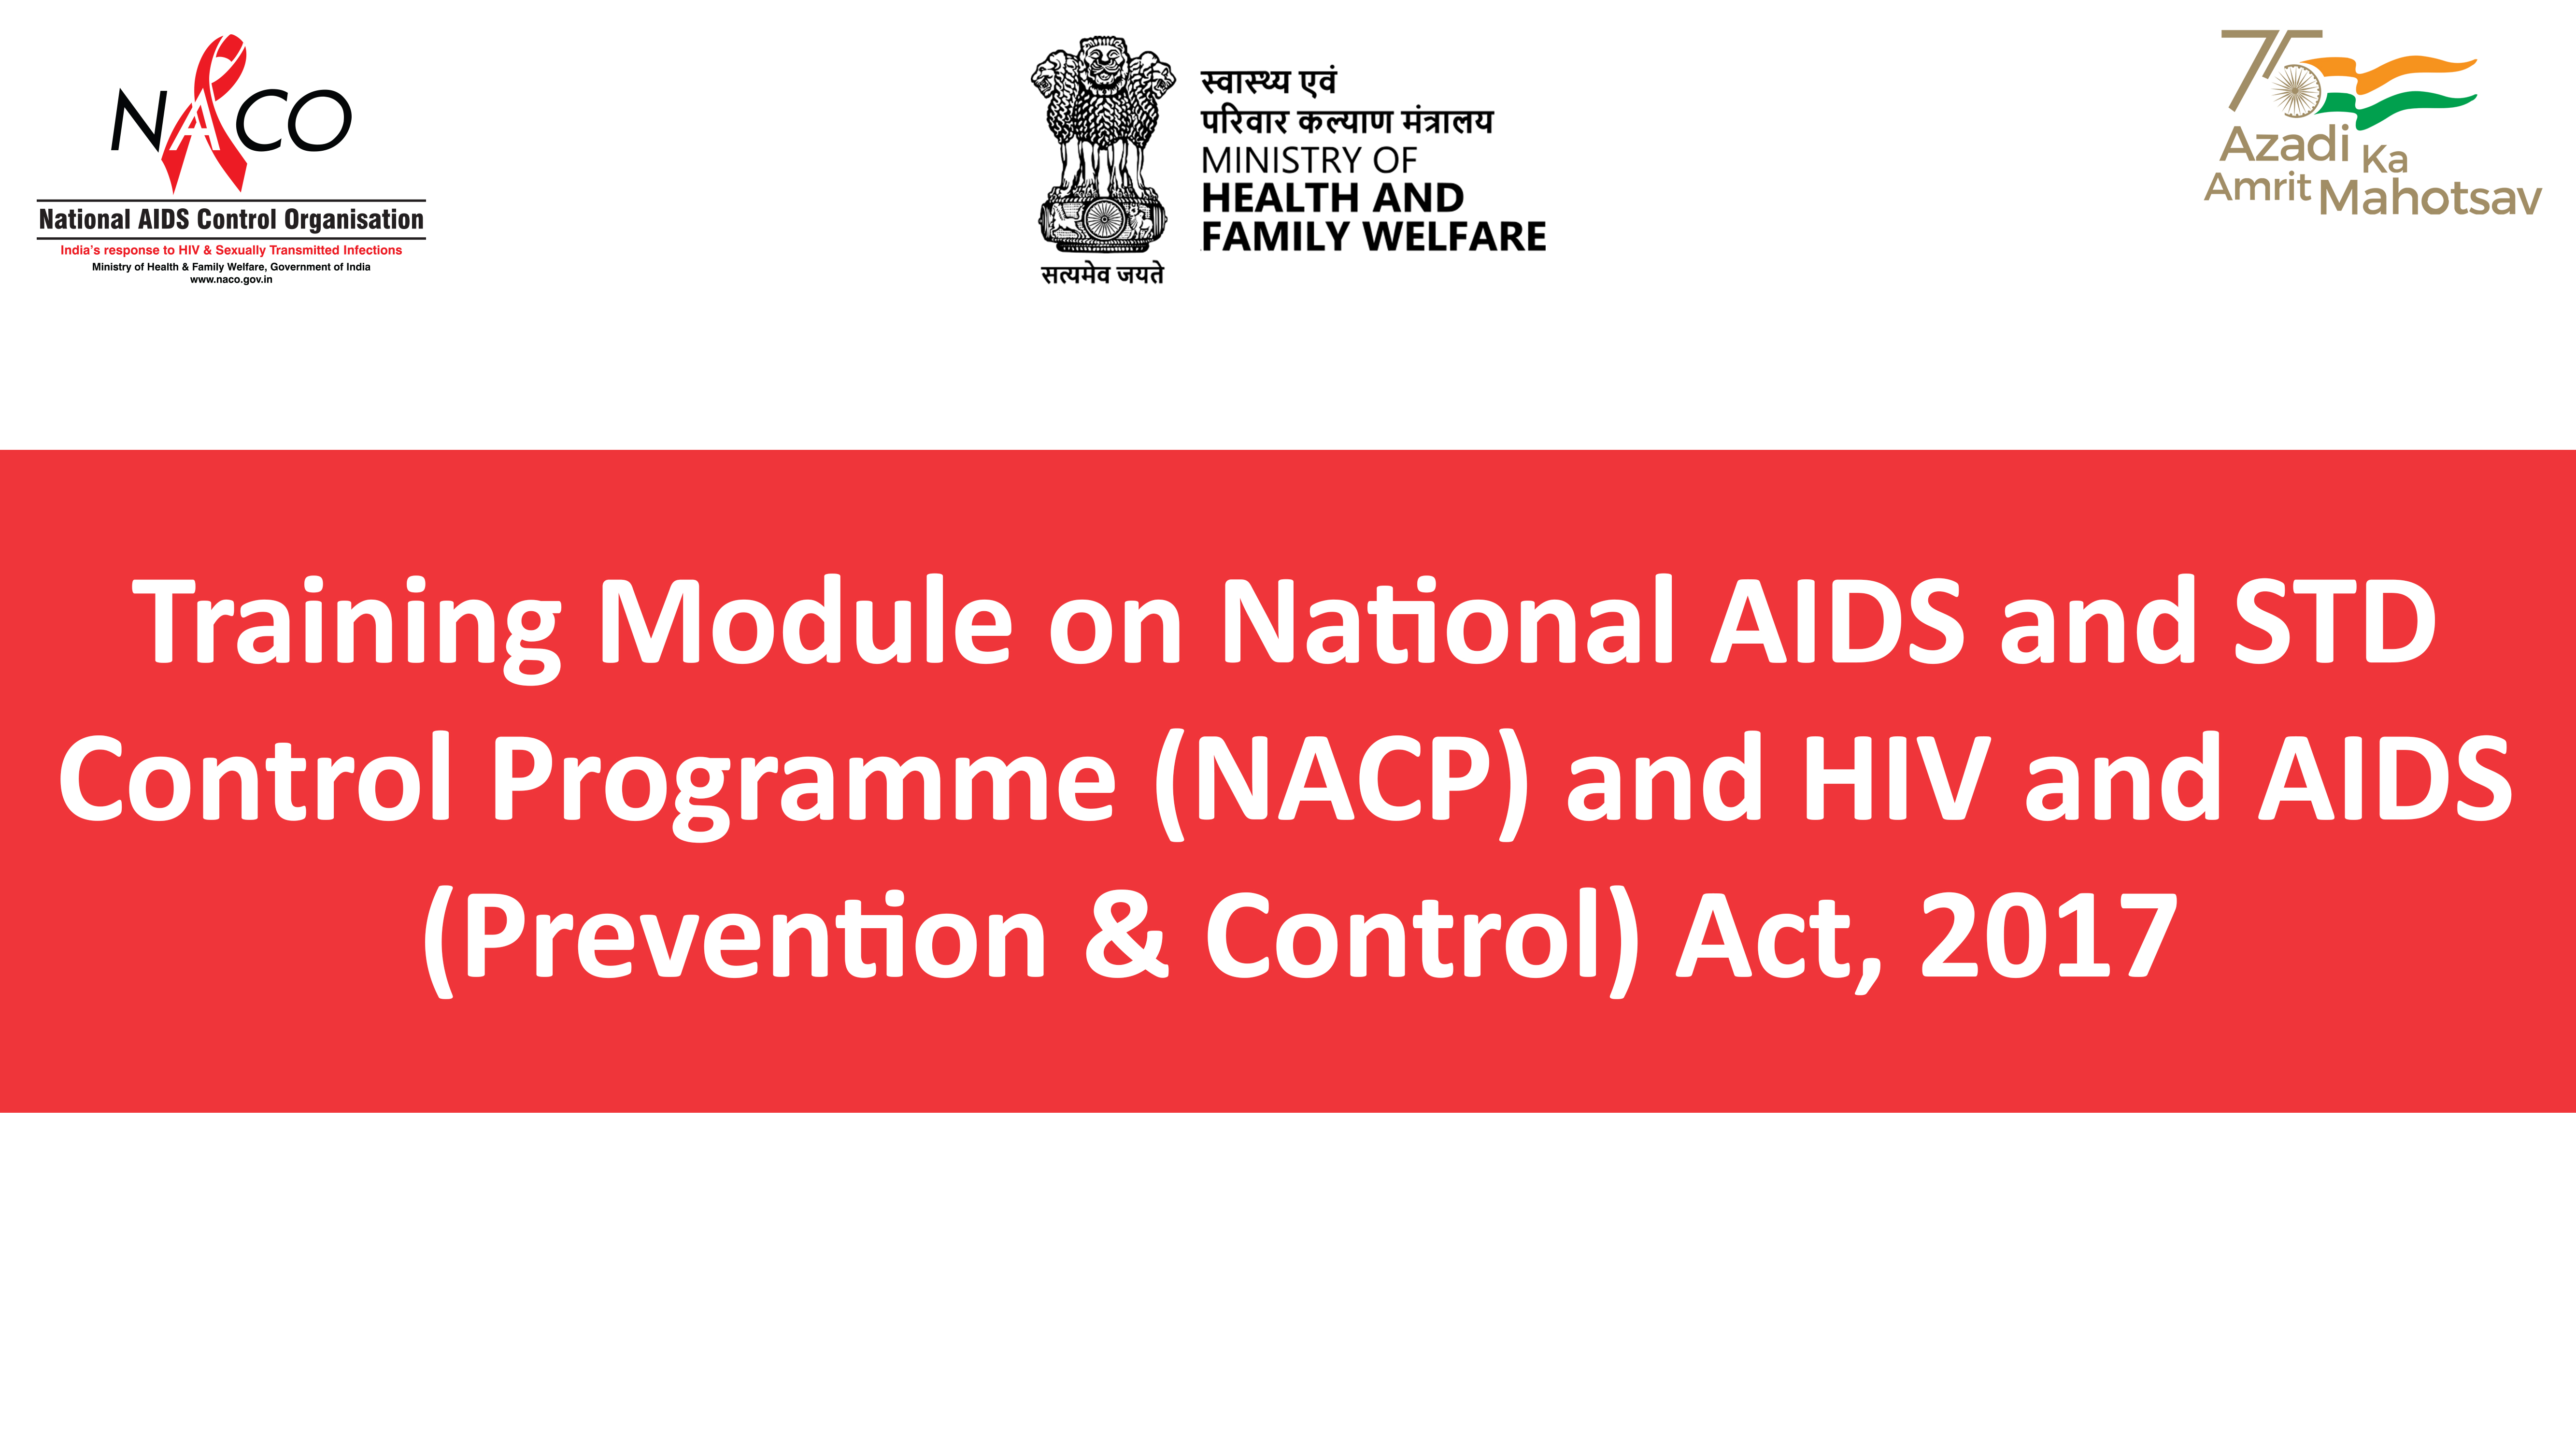 Training Module on National AIDS and STD Control Programme (NACP) and HIV and AIDS (Prevention & Control) Act, 2017